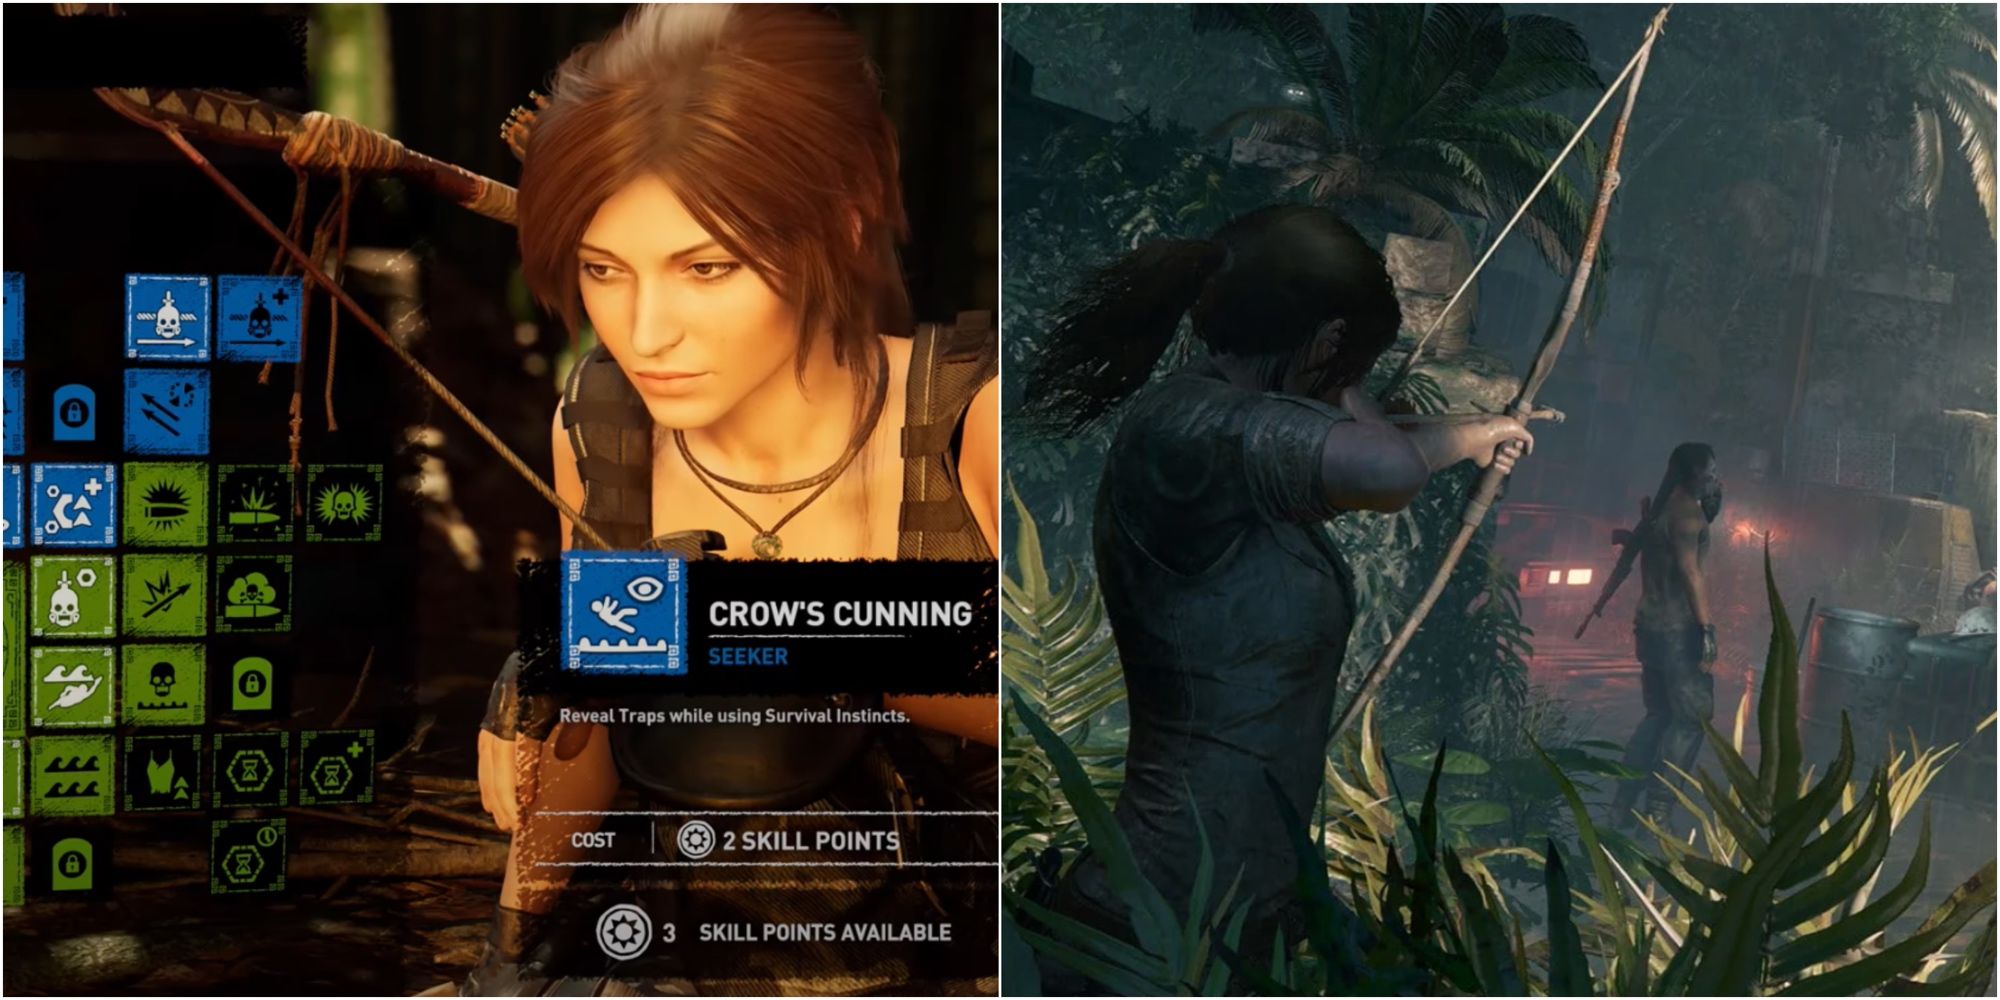 Lara next to a campfire and firing an arrow at an enemy from behind 